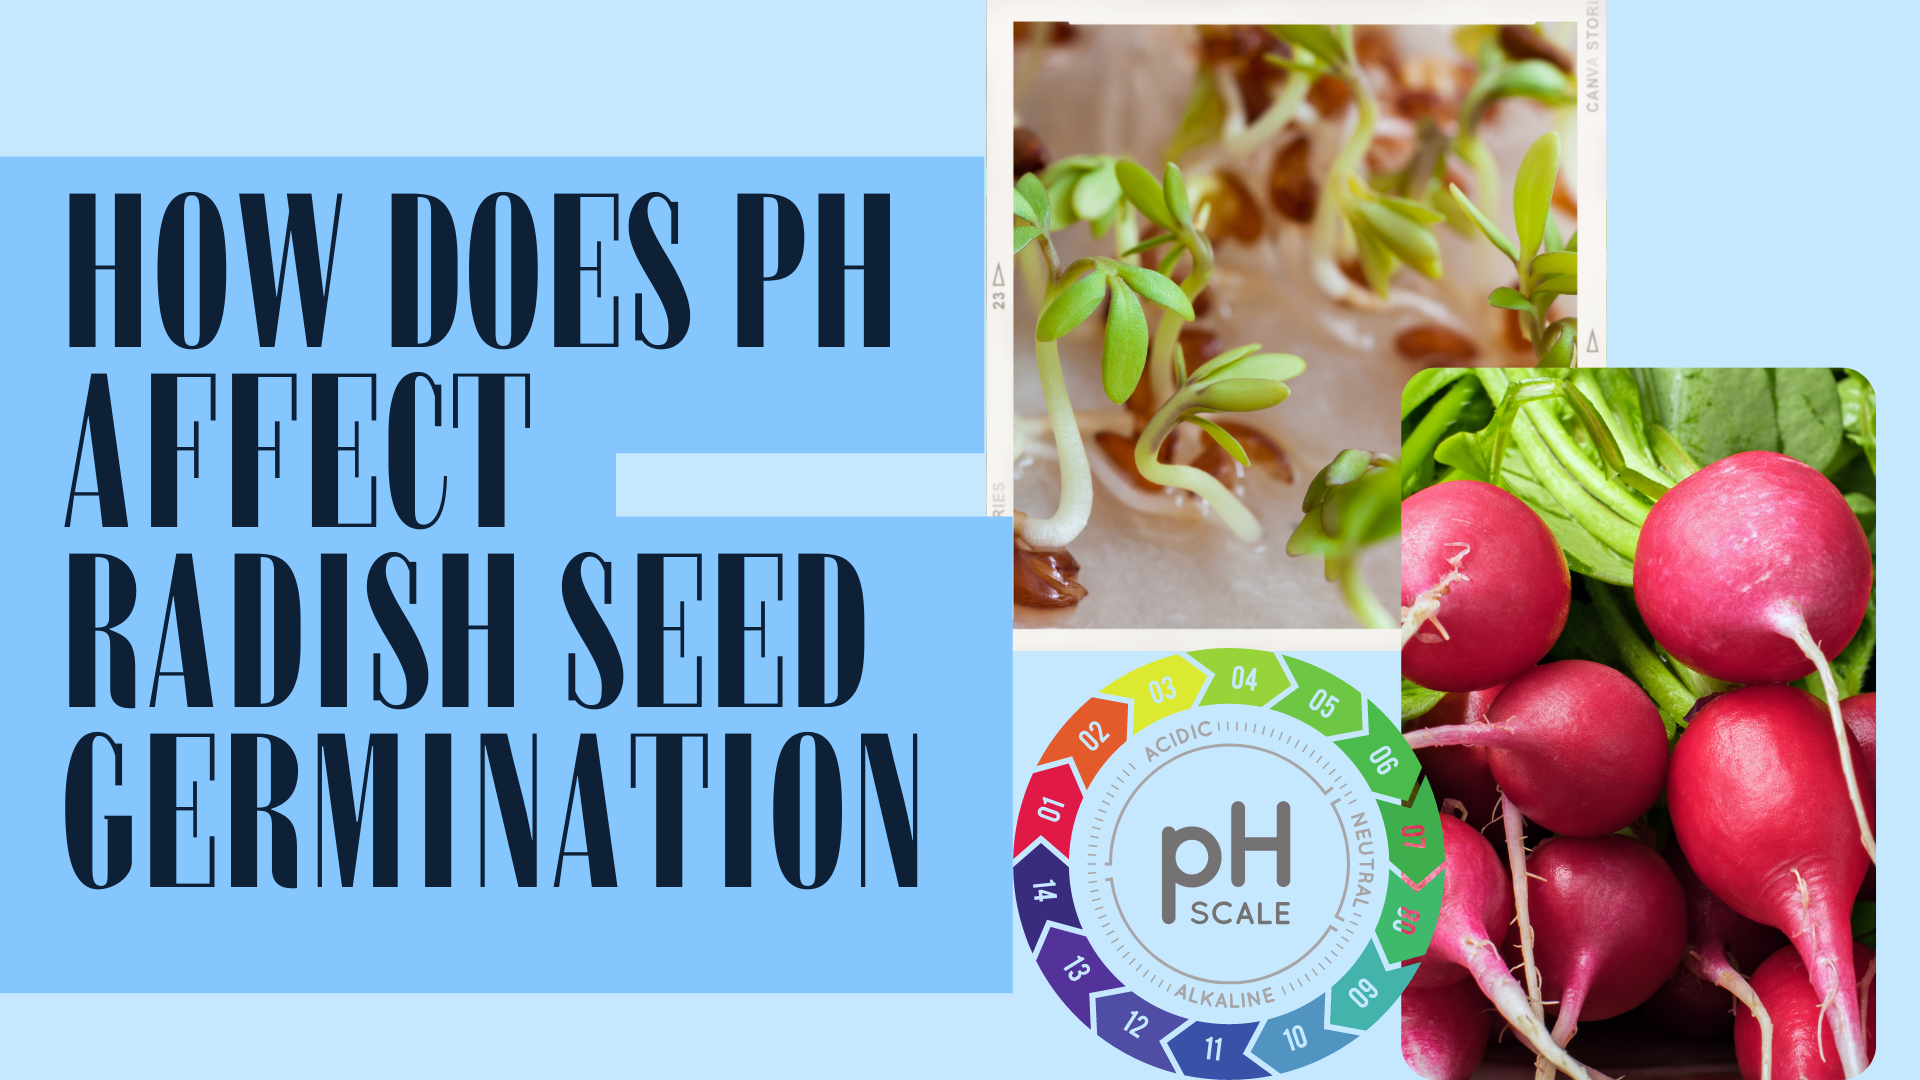 How Does ph Affect Radish Seed Germination